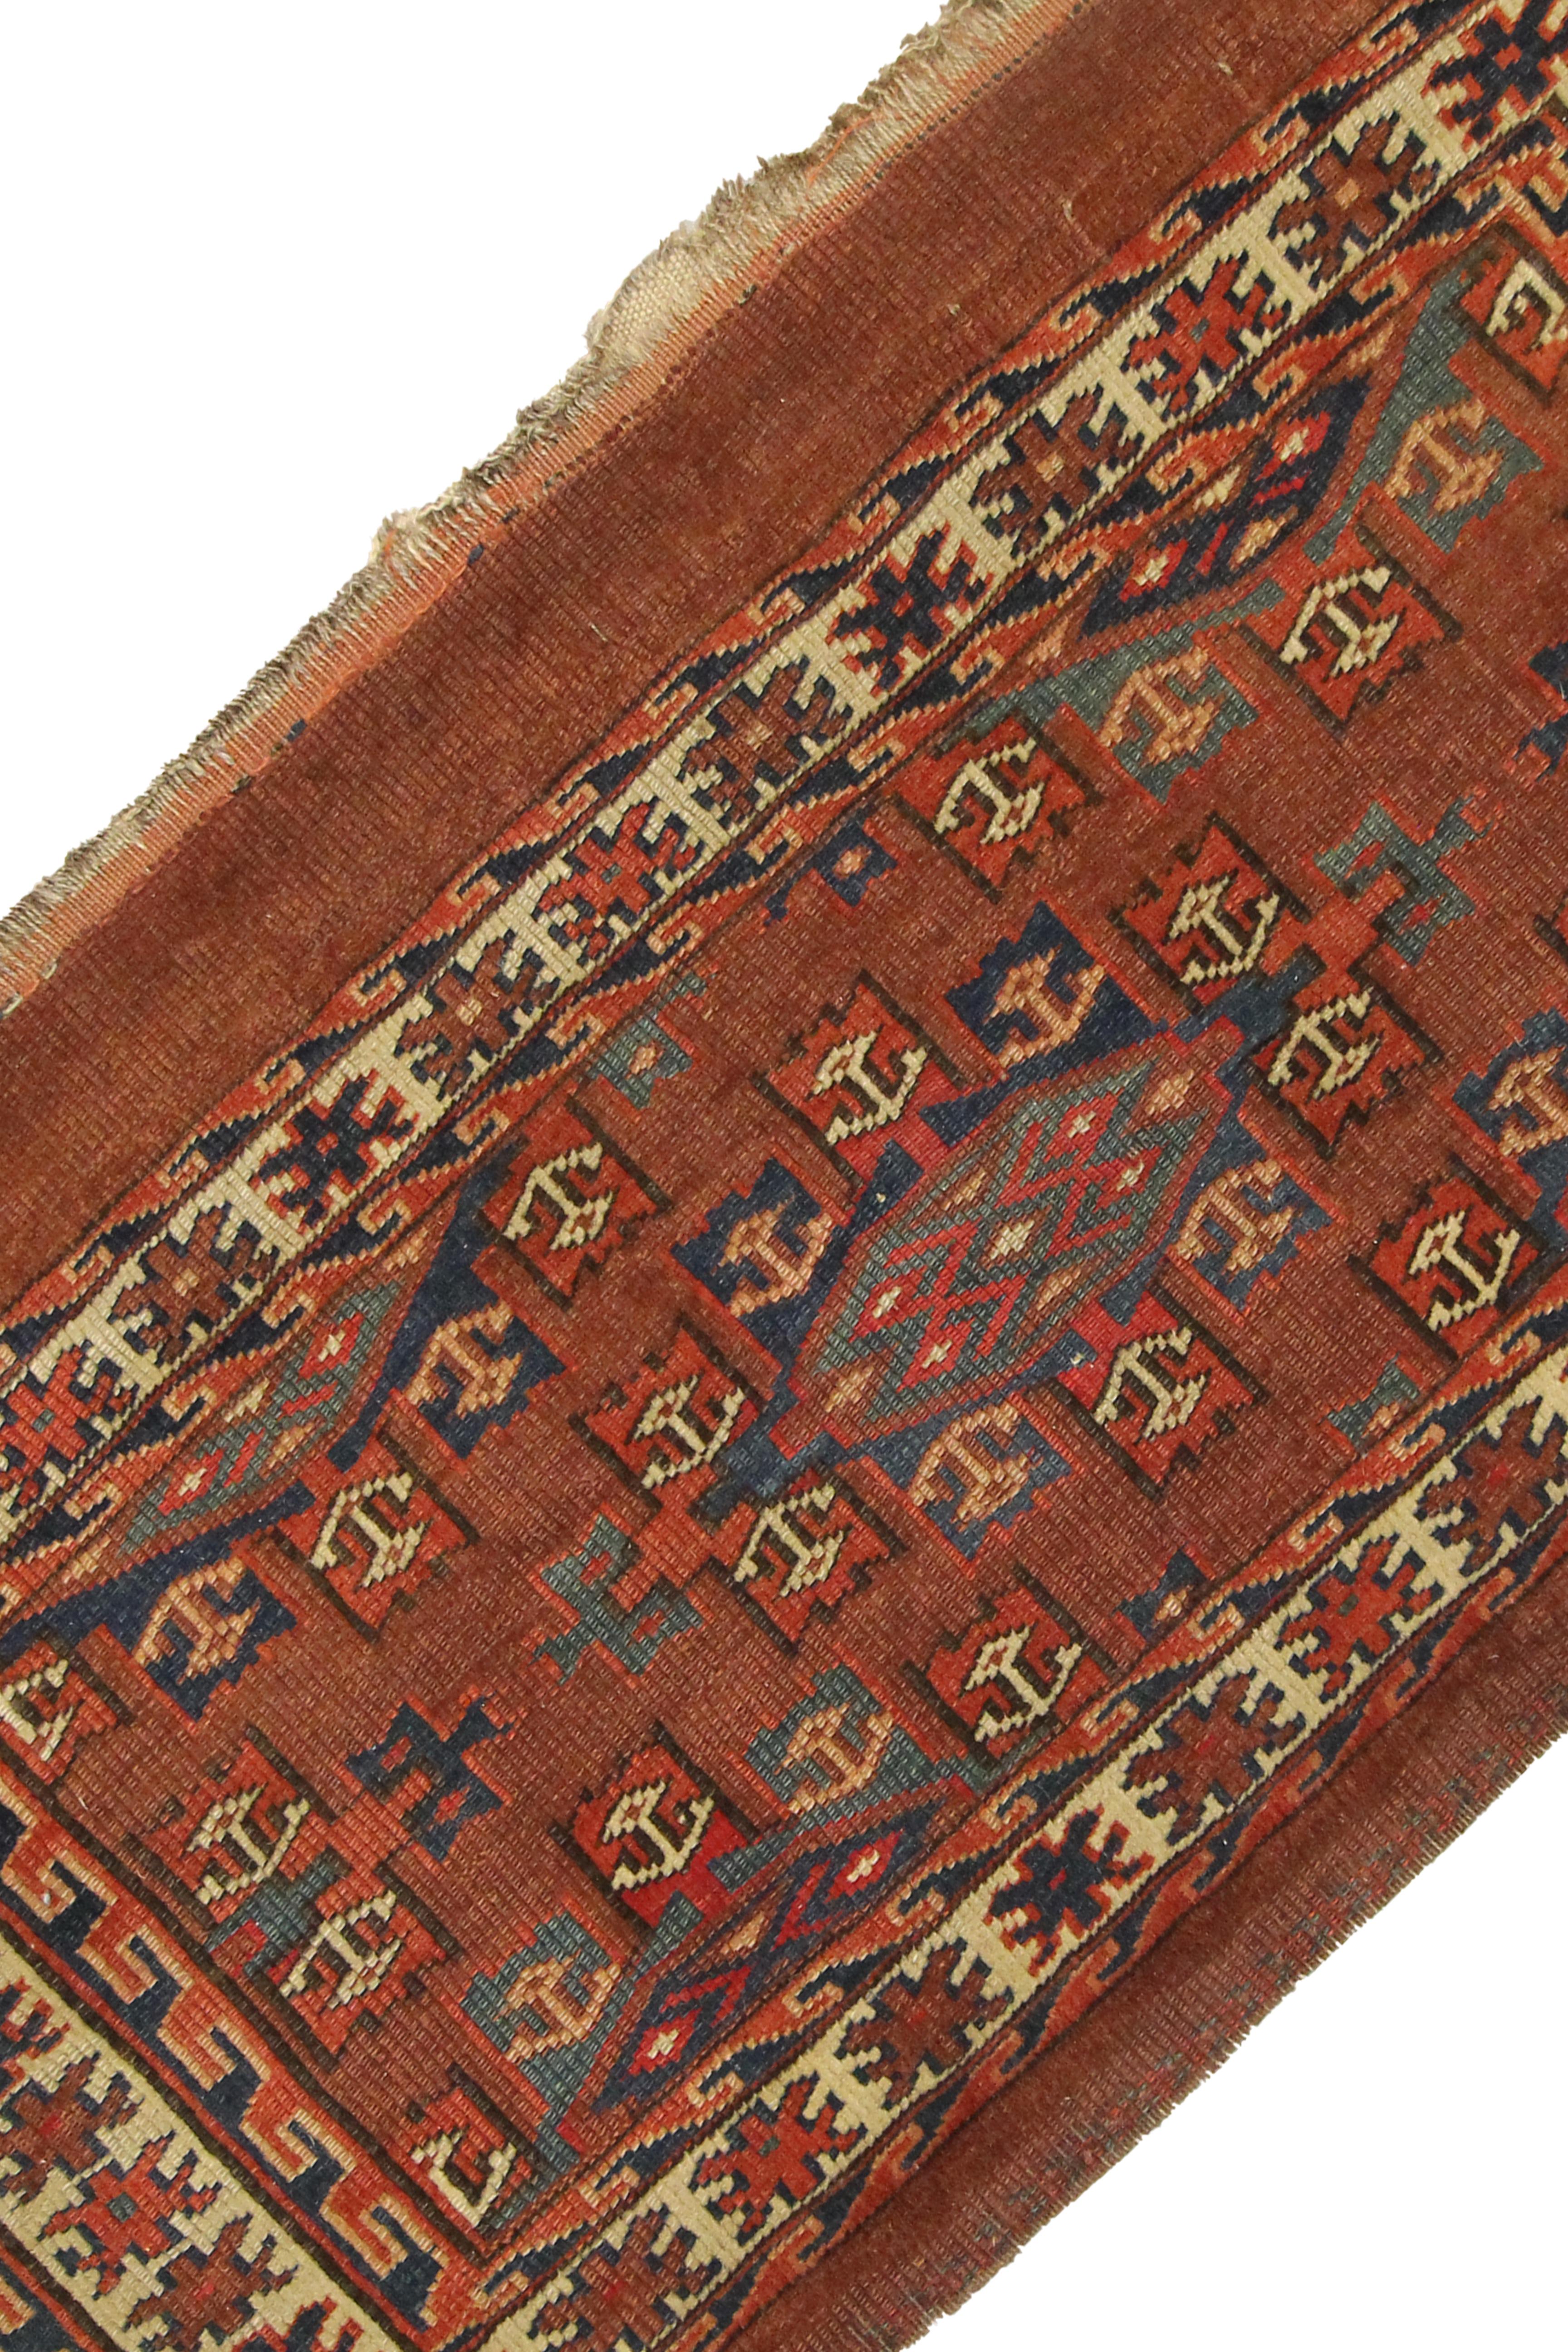 This unique Chuval rug is a rare antique rug woven in the 1890s with a traditional Turkmen design. The central pattern is a traditional design woven with geometric patterns in accents of blue, beige and rust on a brown background. The colour palette